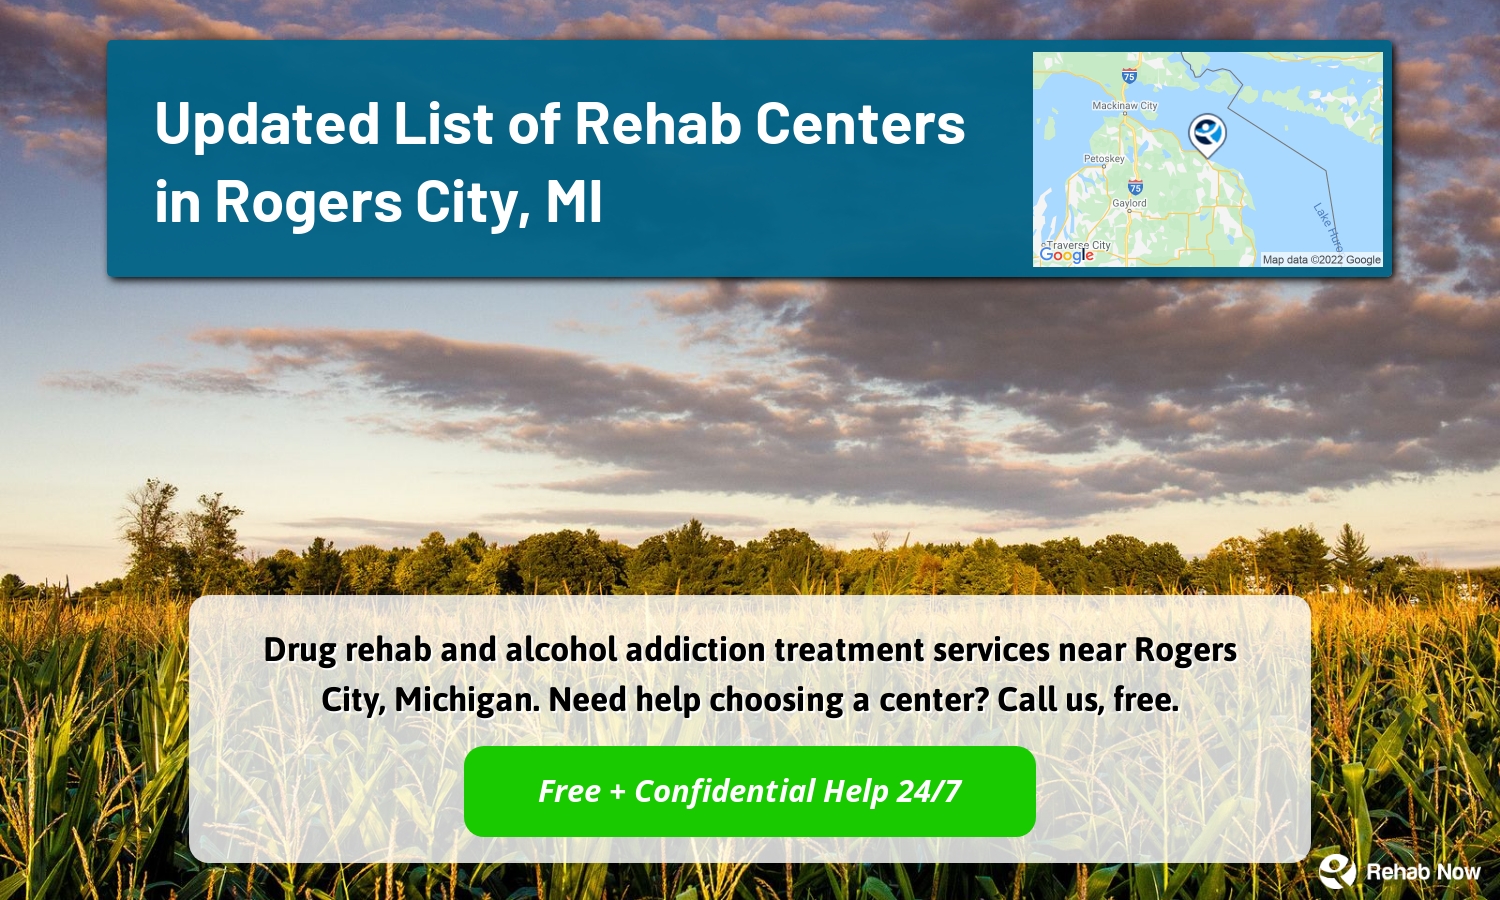 Drug rehab and alcohol addiction treatment services near Rogers City, Michigan. Need help choosing a center? Call us, free.